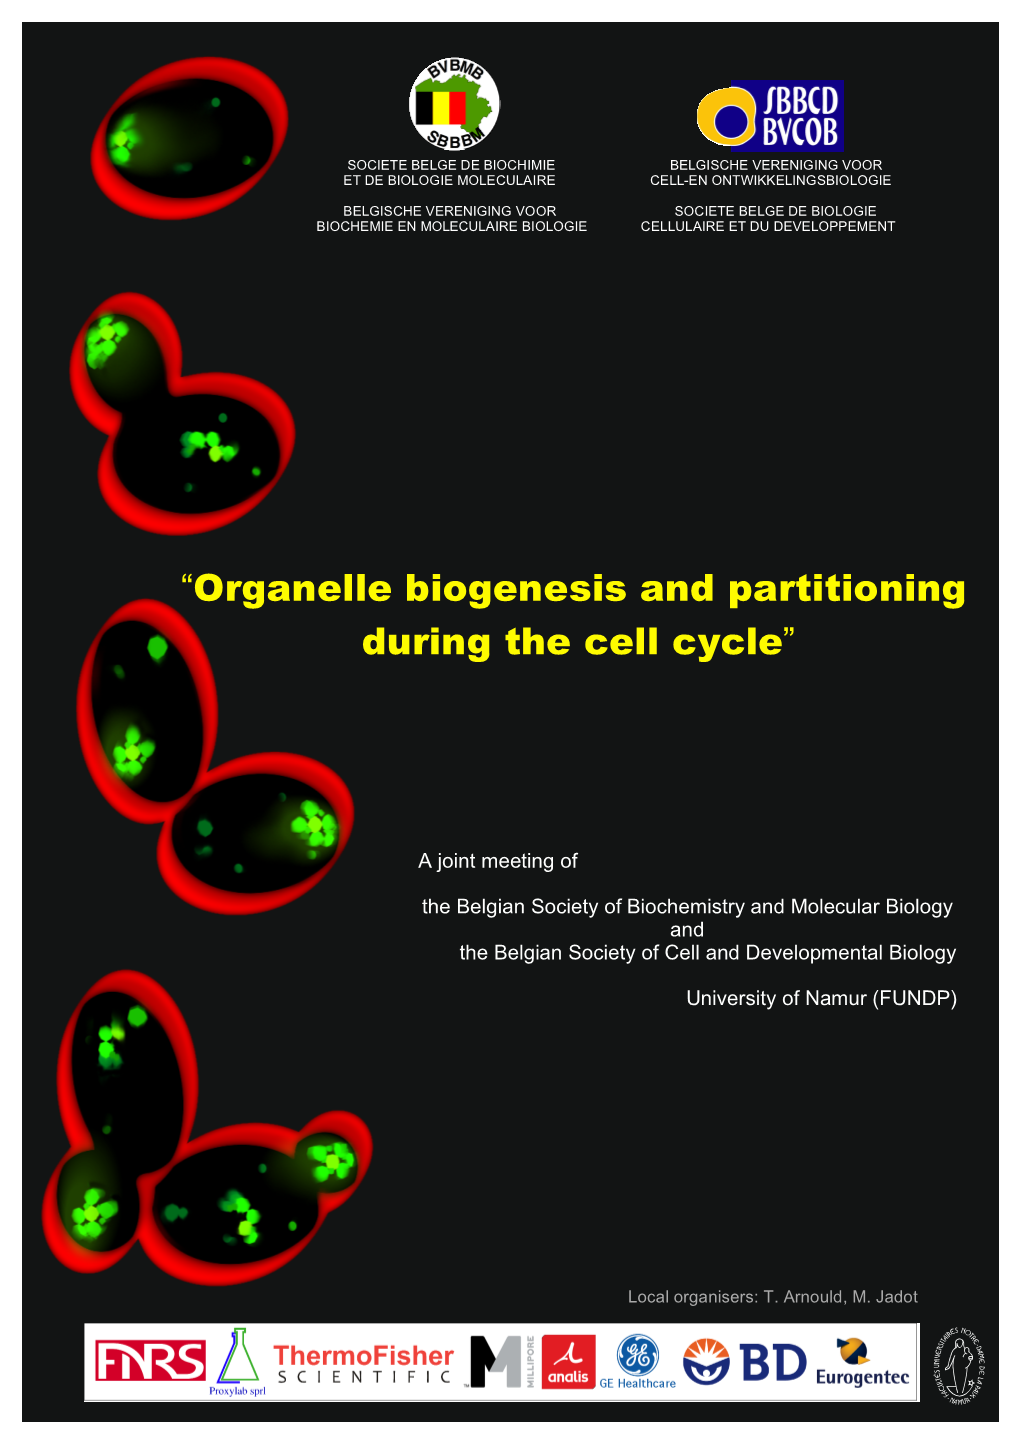 “Organelle Biogenesis and Partitioning During the Cell Cycle”